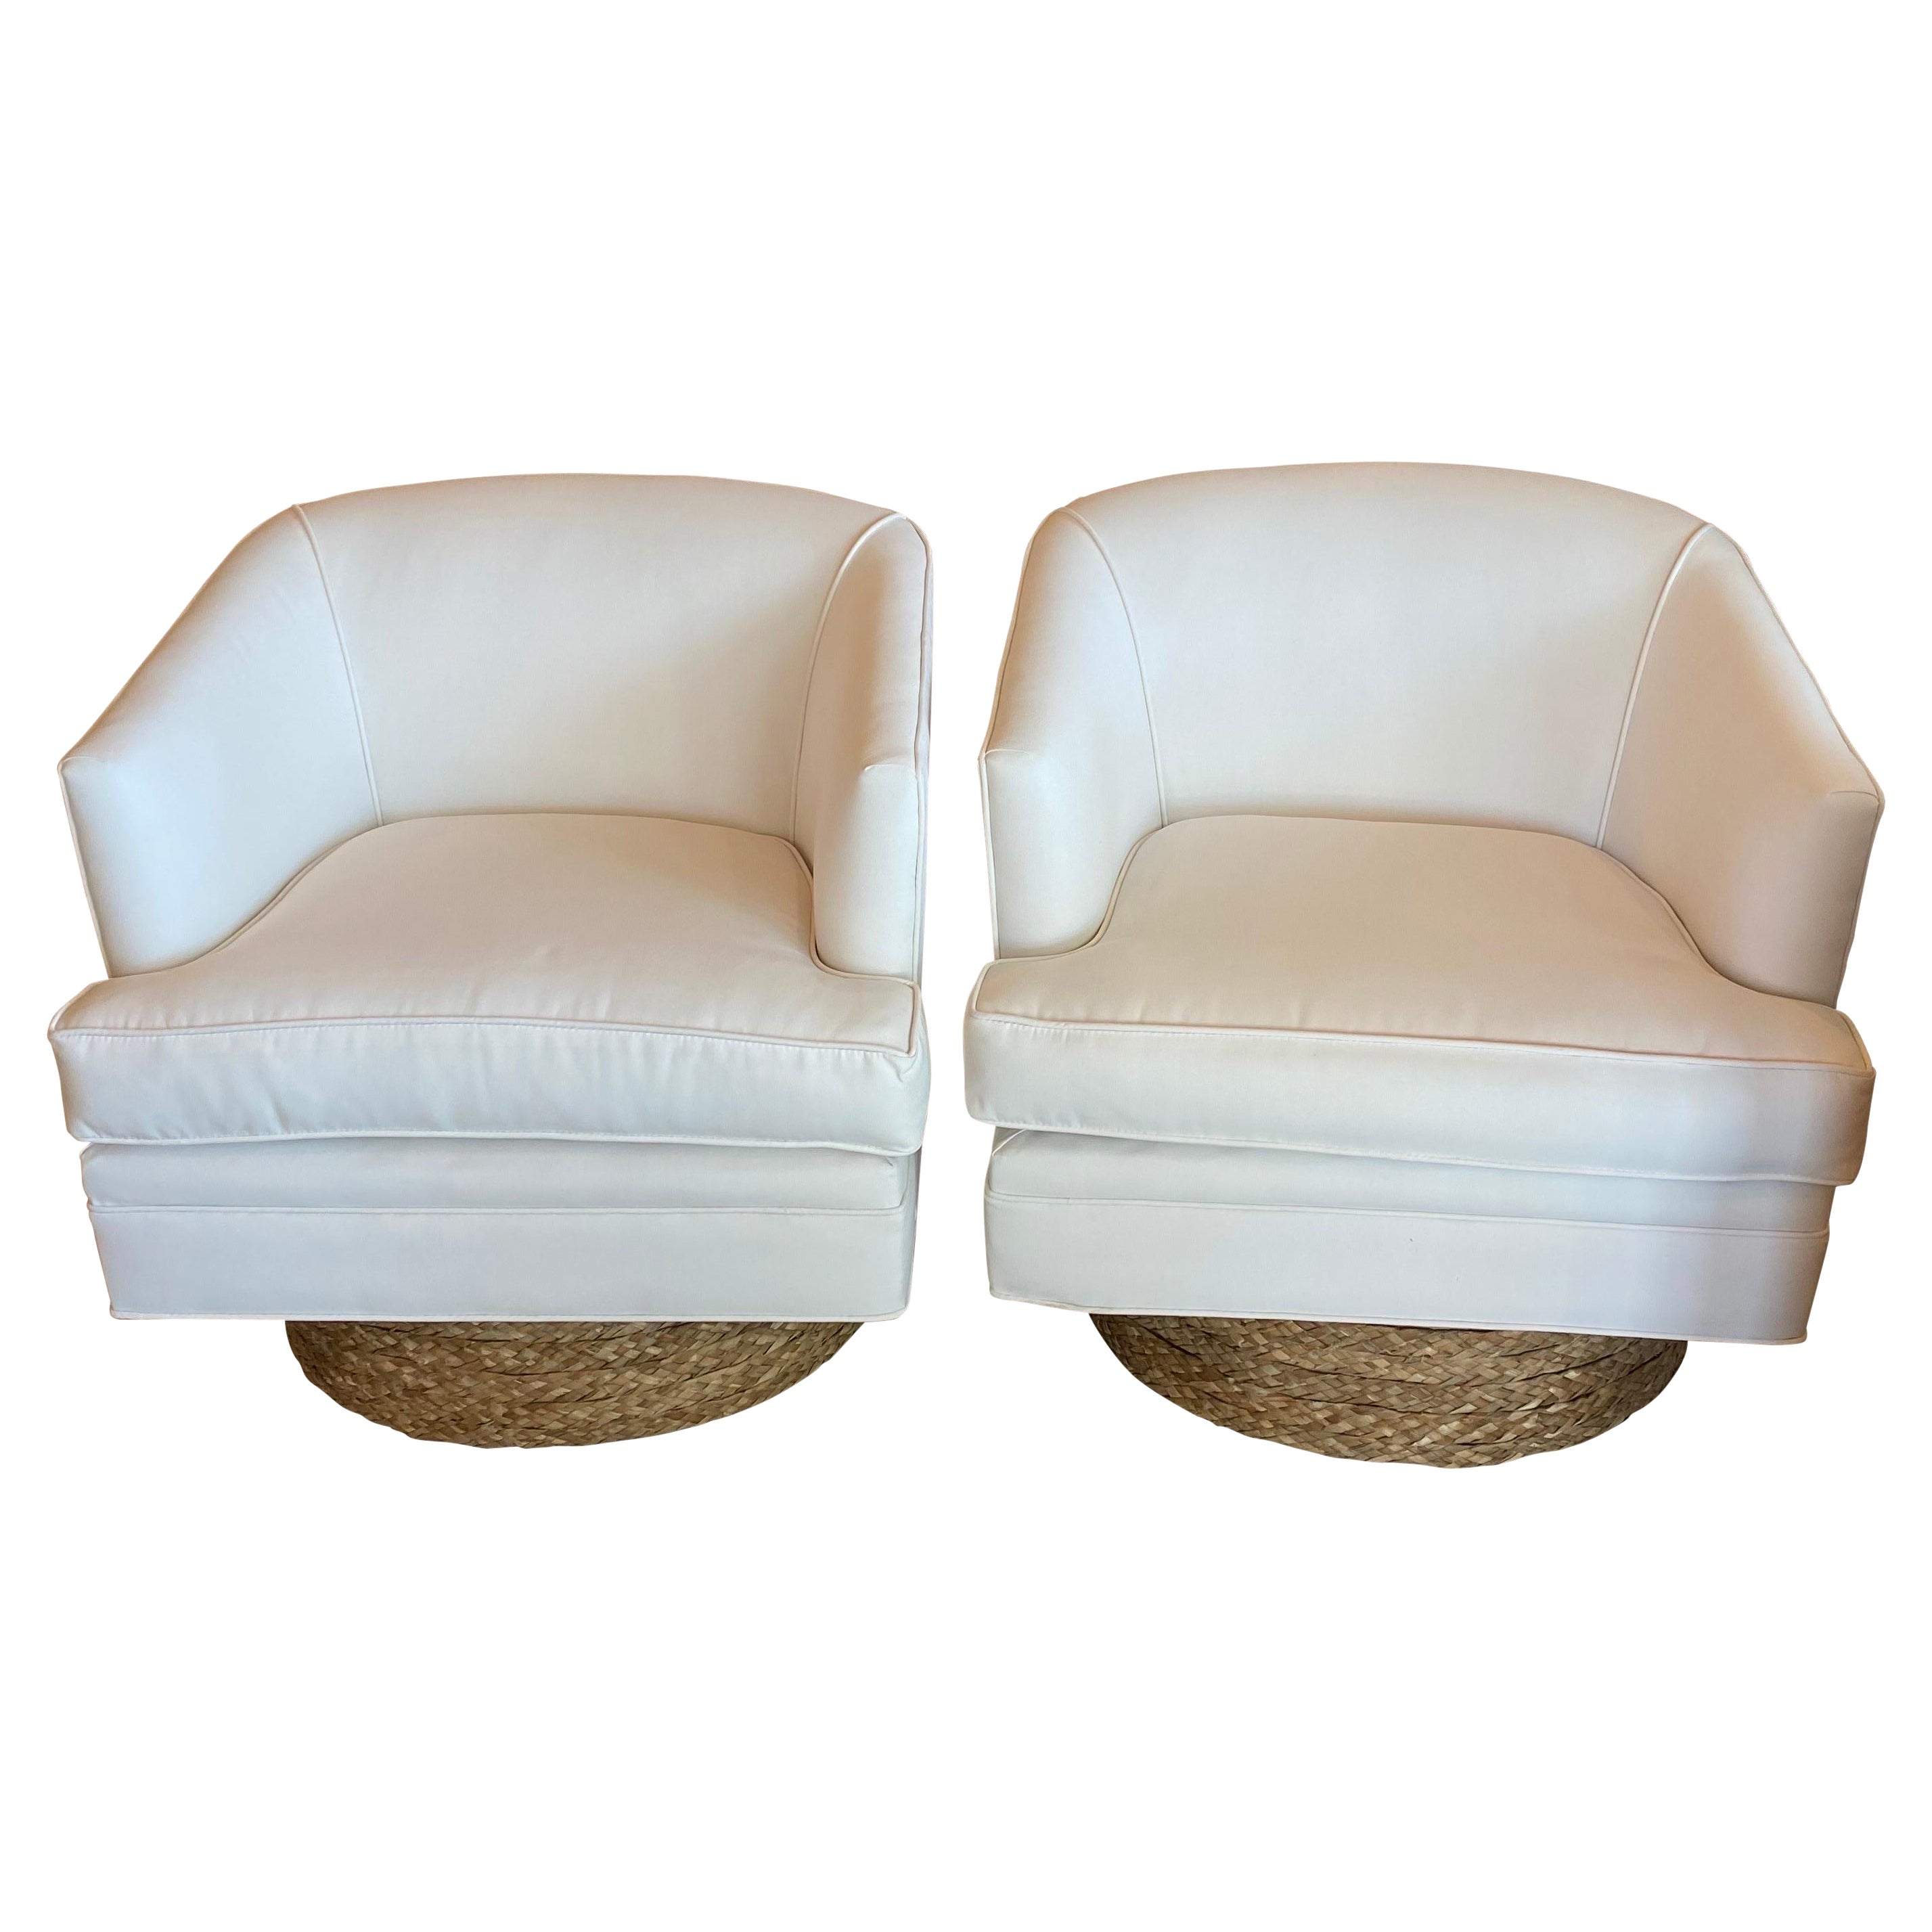 Pair of Barrel Swivel Chairs Newly Upholstered Sunbrella White Seagrass Base